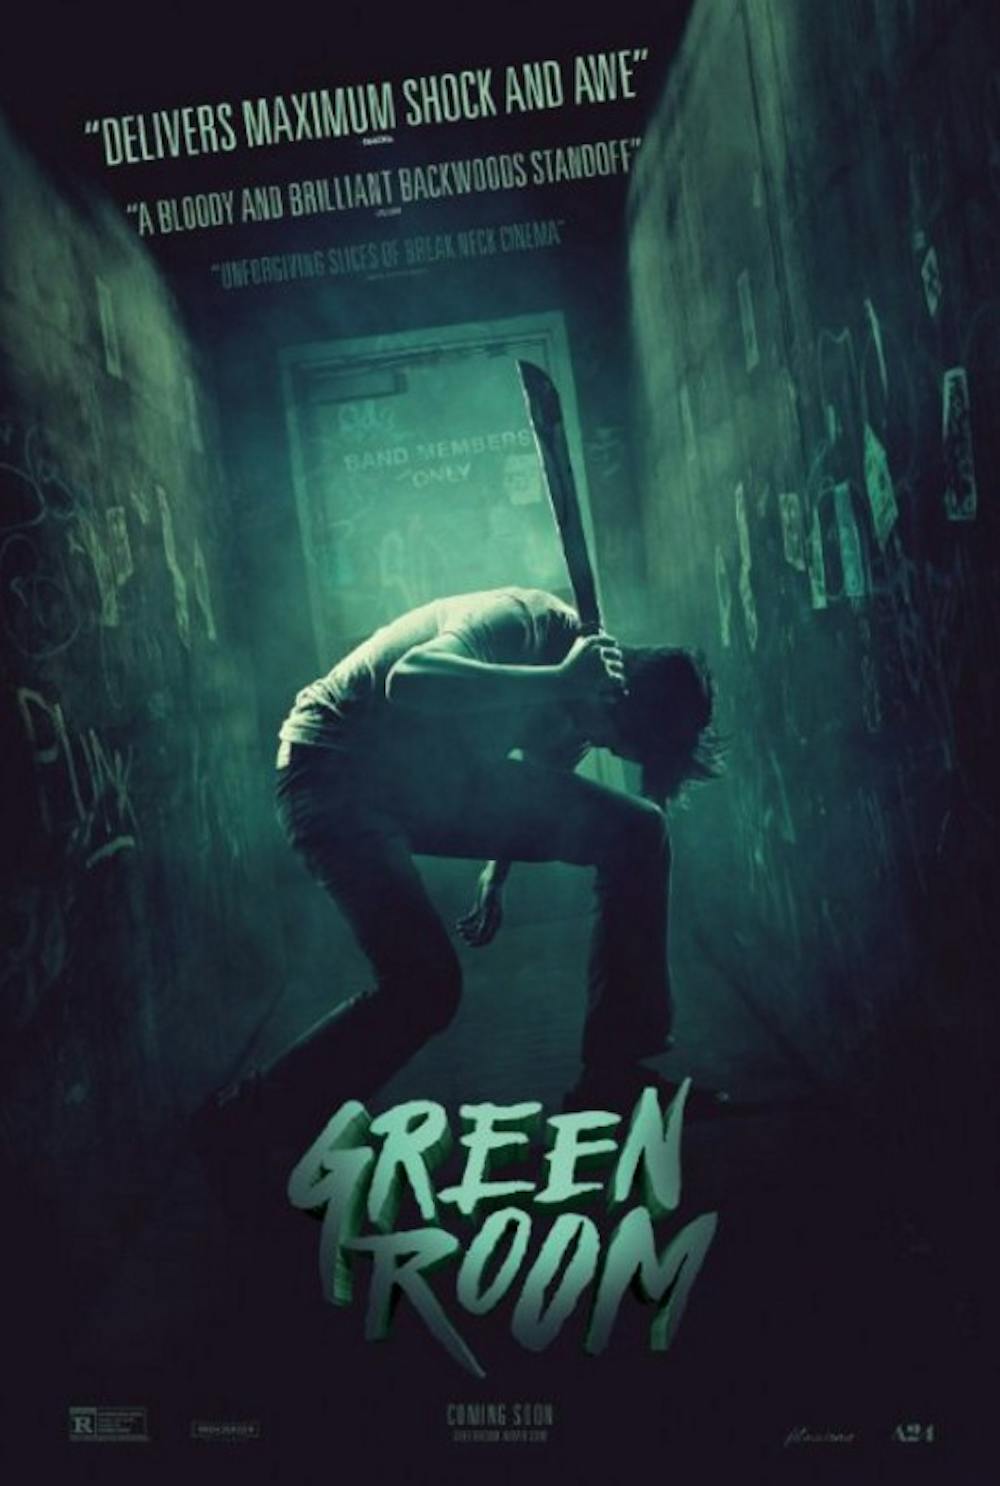 "Greem Room" stuns audiences with a particular type of terror.